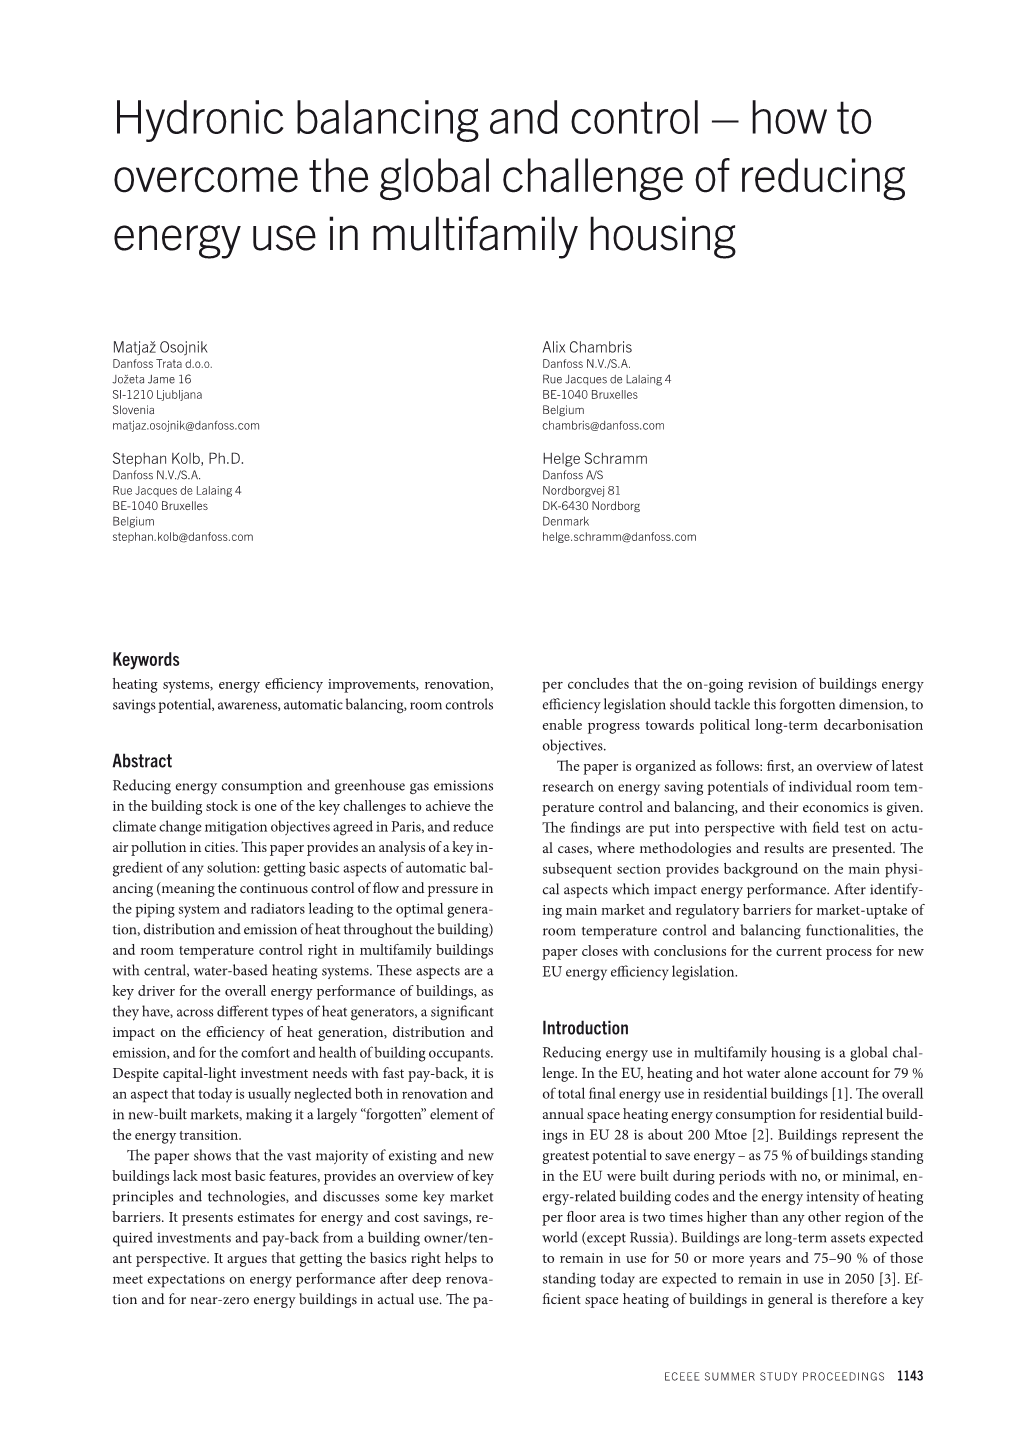 Hydronic Balancing and Control – How to Overcome the Global Challenge of Reducing Energy Use in Multifamily Housing